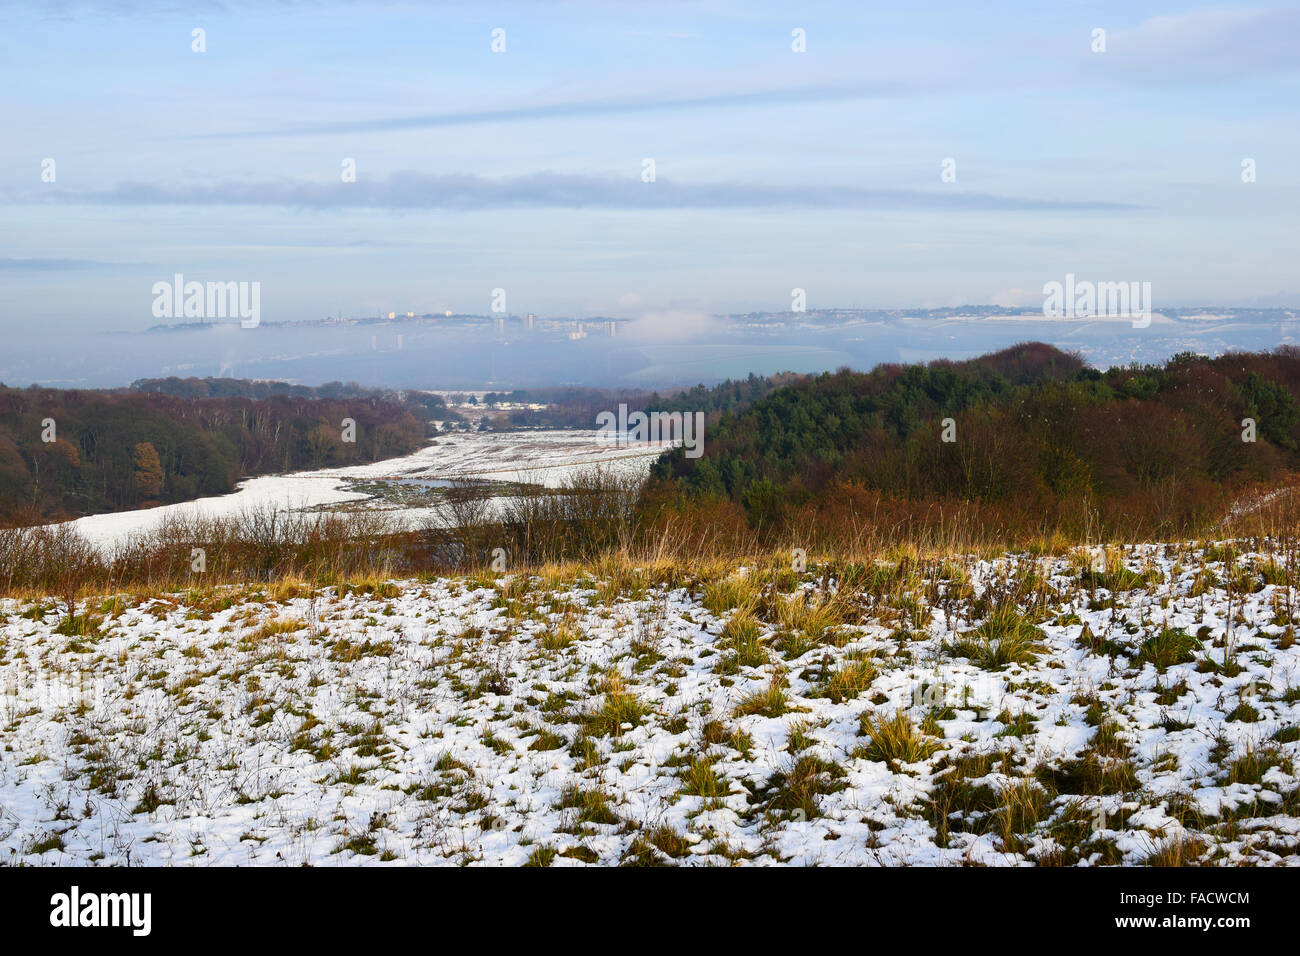 Looking across snowy fields, to Gateshead in the distance. Stock Photo